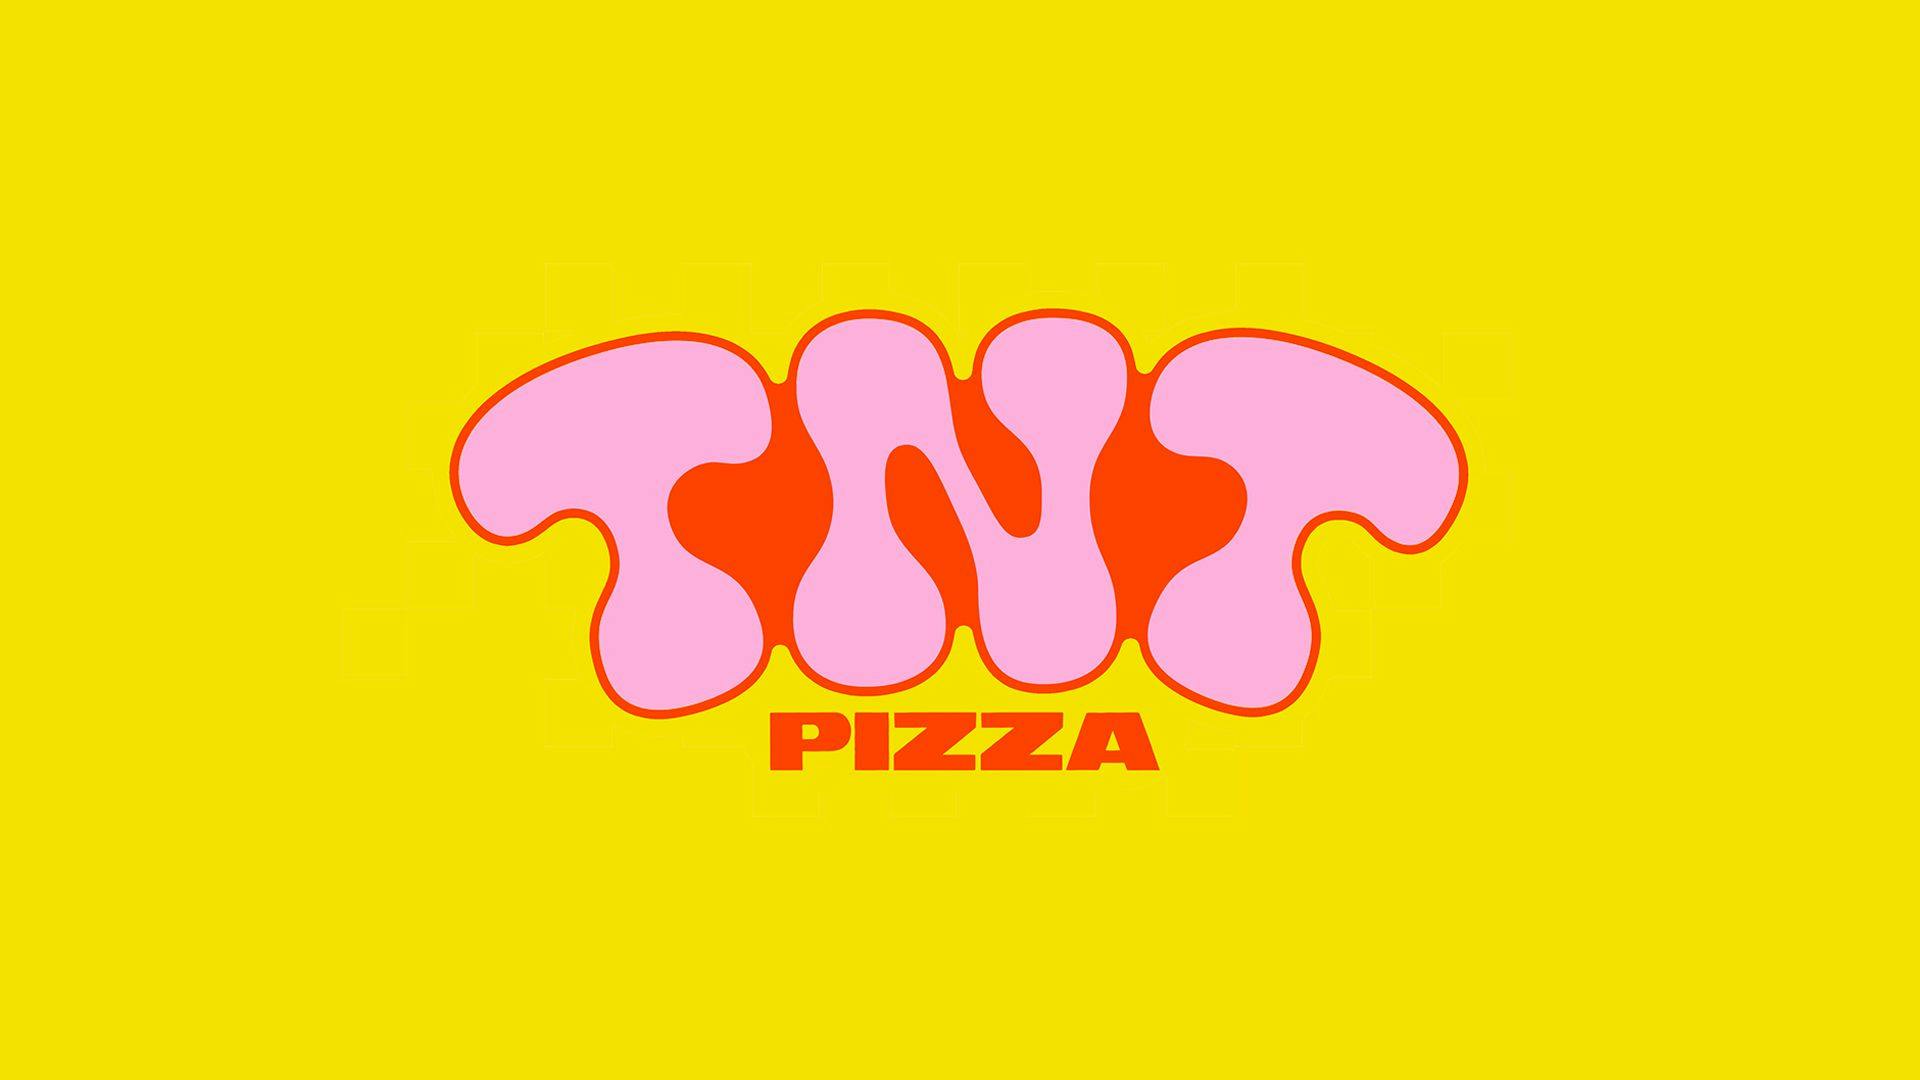 TNT Pizza logo in pink and red from the Brand Identity & Packaging project